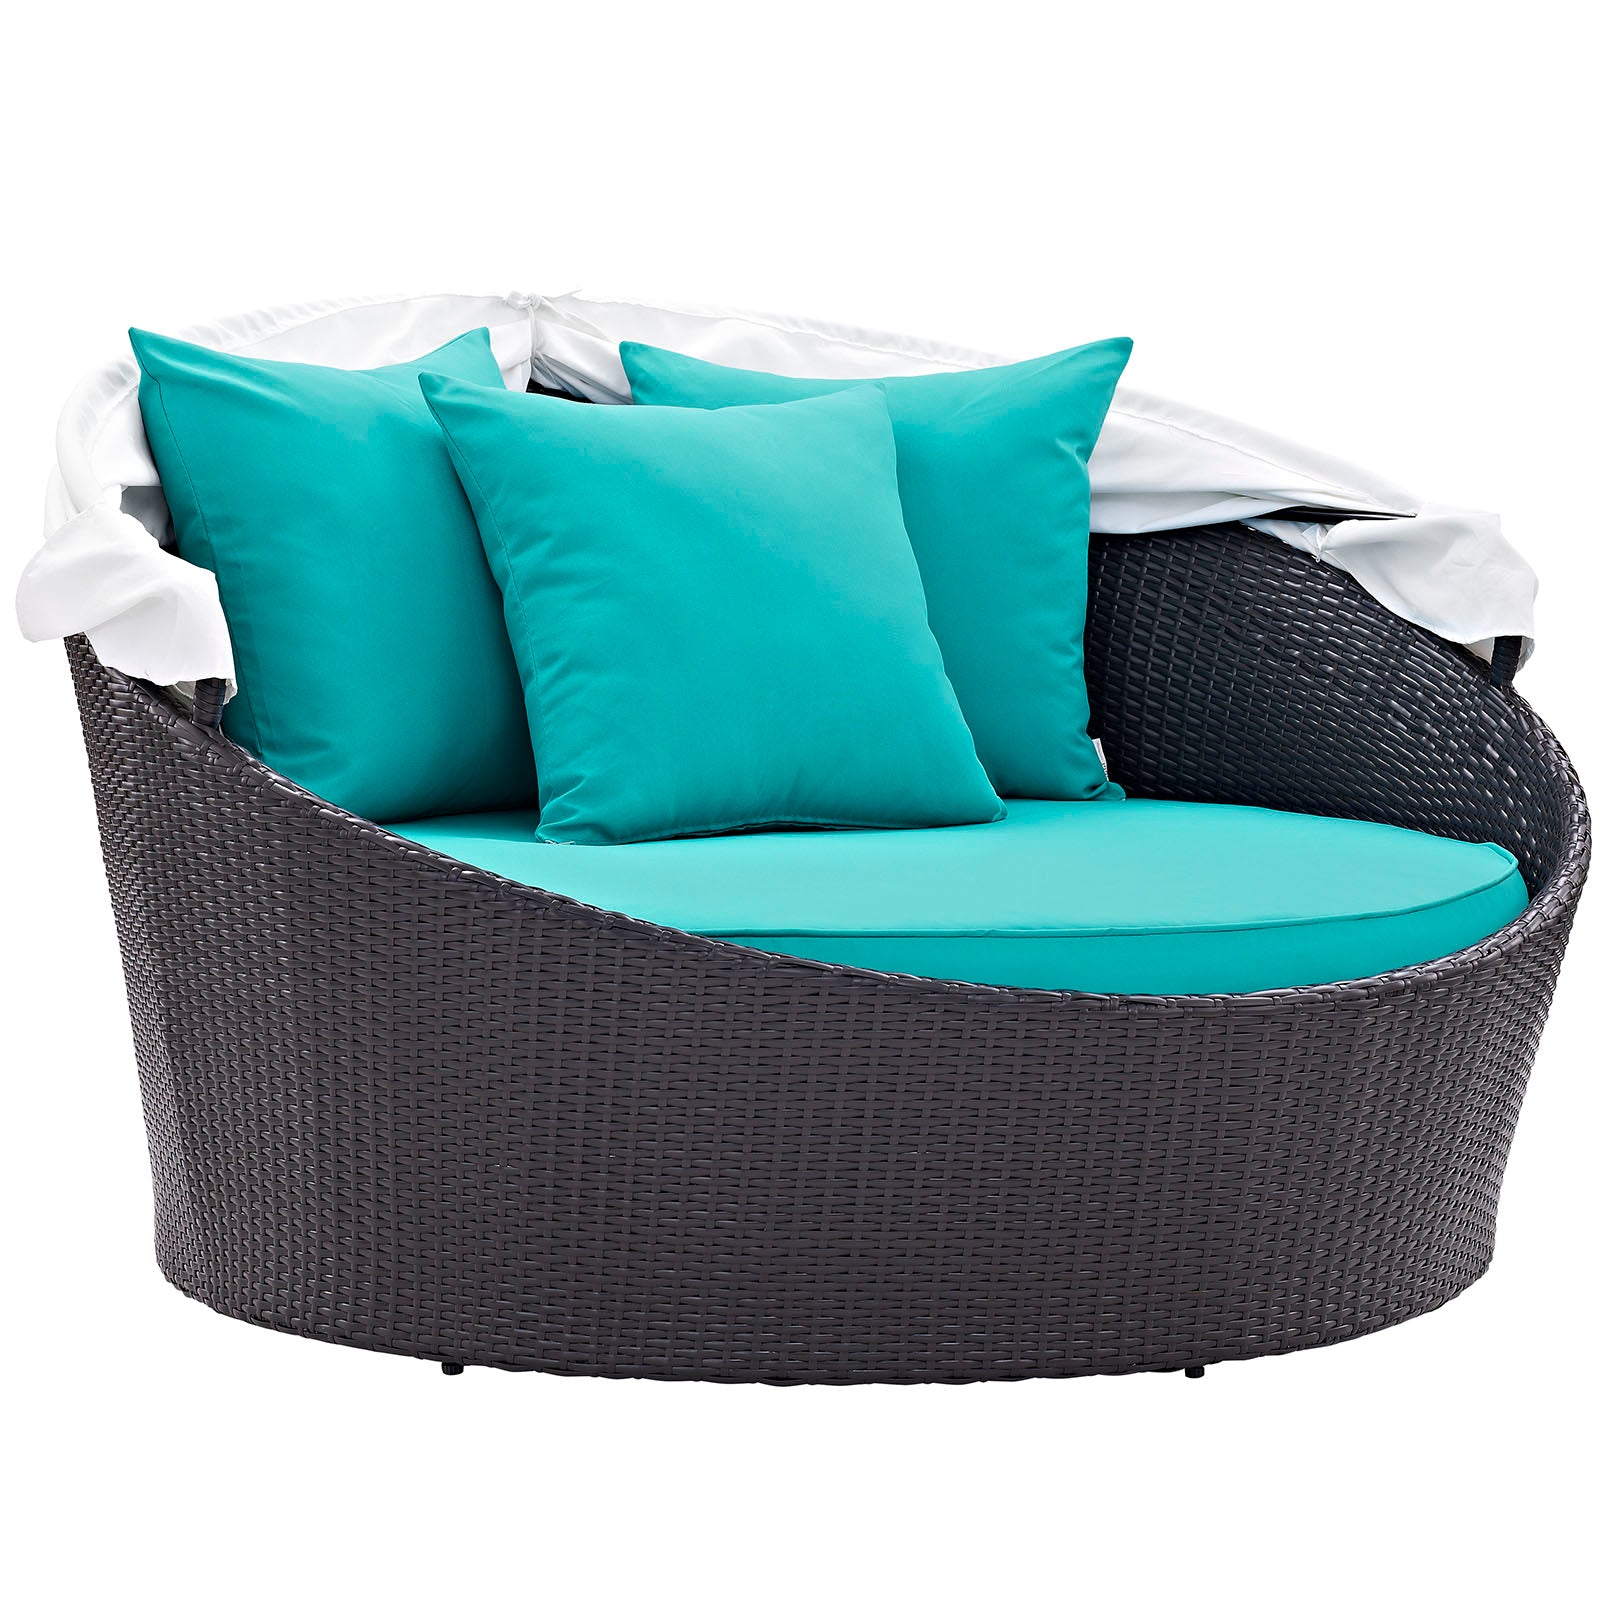 Modway Patio Daybeds - Convene Canopy Outdoor Patio Daybed Espresso Turquoise